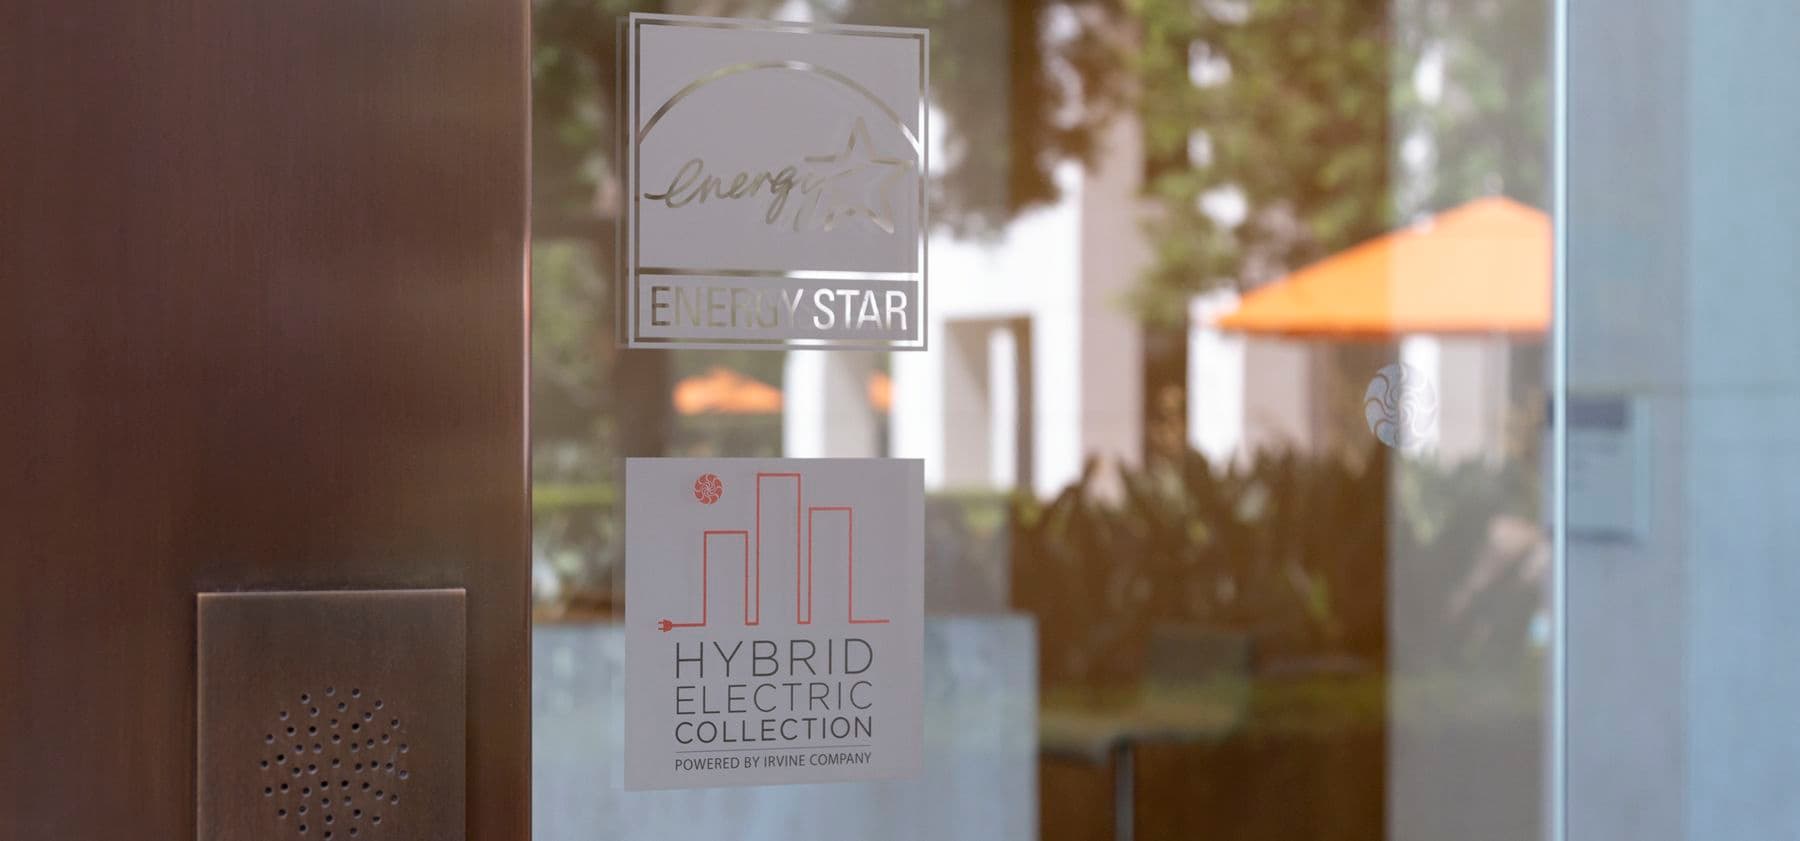 Sustainability signage for LEED, ENERGY STAR and the Hybrid Electric Collection at 1 Park Plaza in Irvine, CA